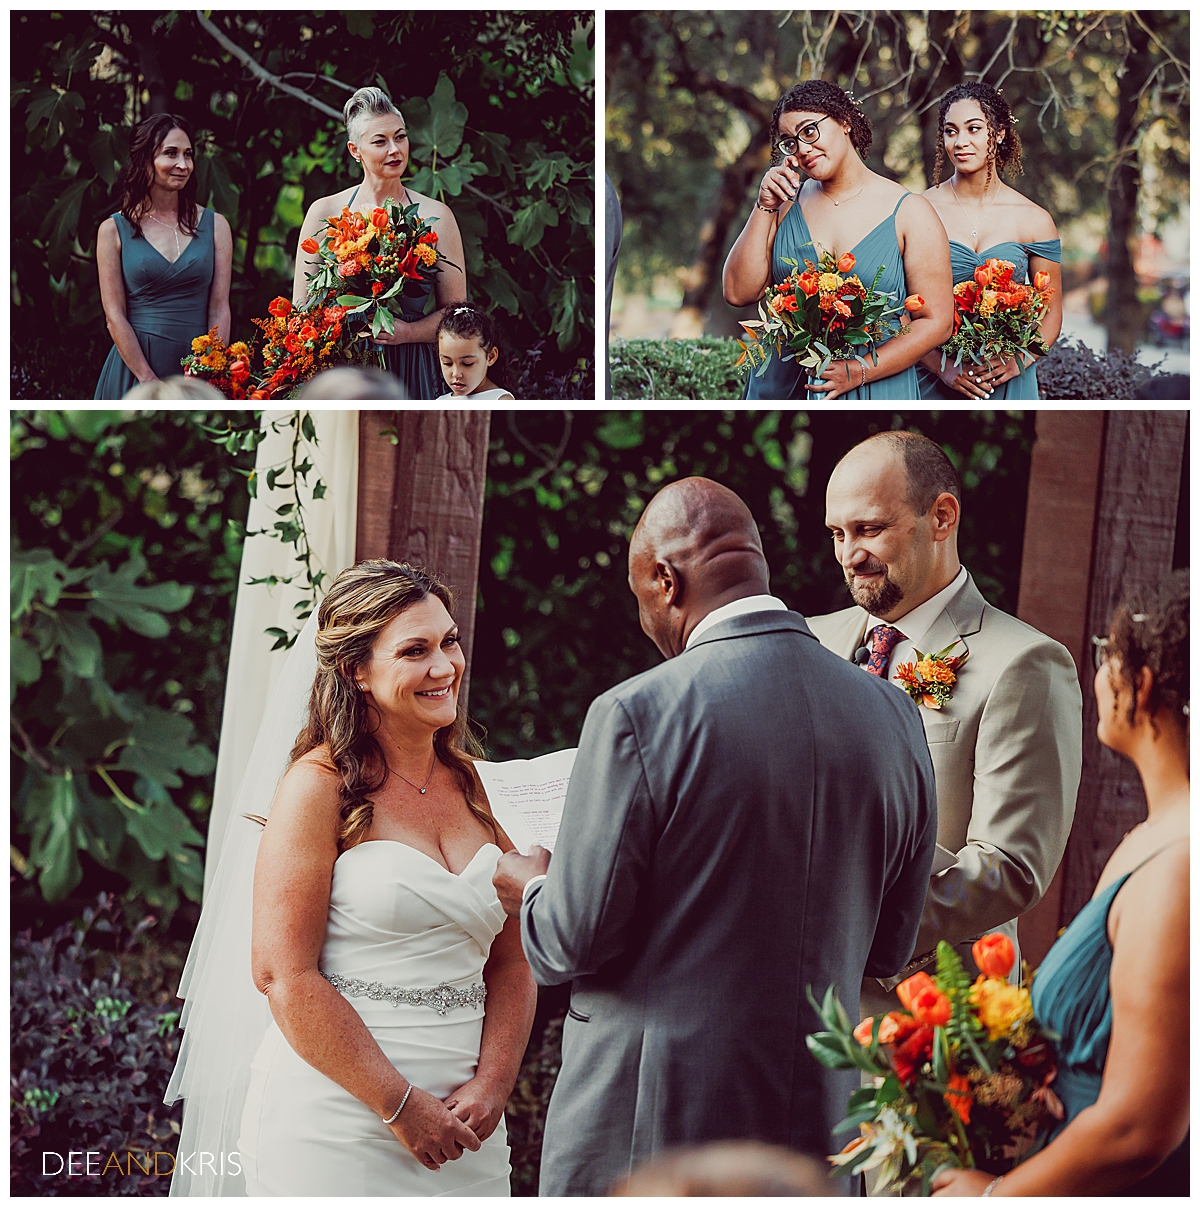 Three images: Top left image of two bridesmaids. Top right image of other two bridesmaids as one wipes away a tear. Bottom image of bride smiling up at groom as he reads his vows.